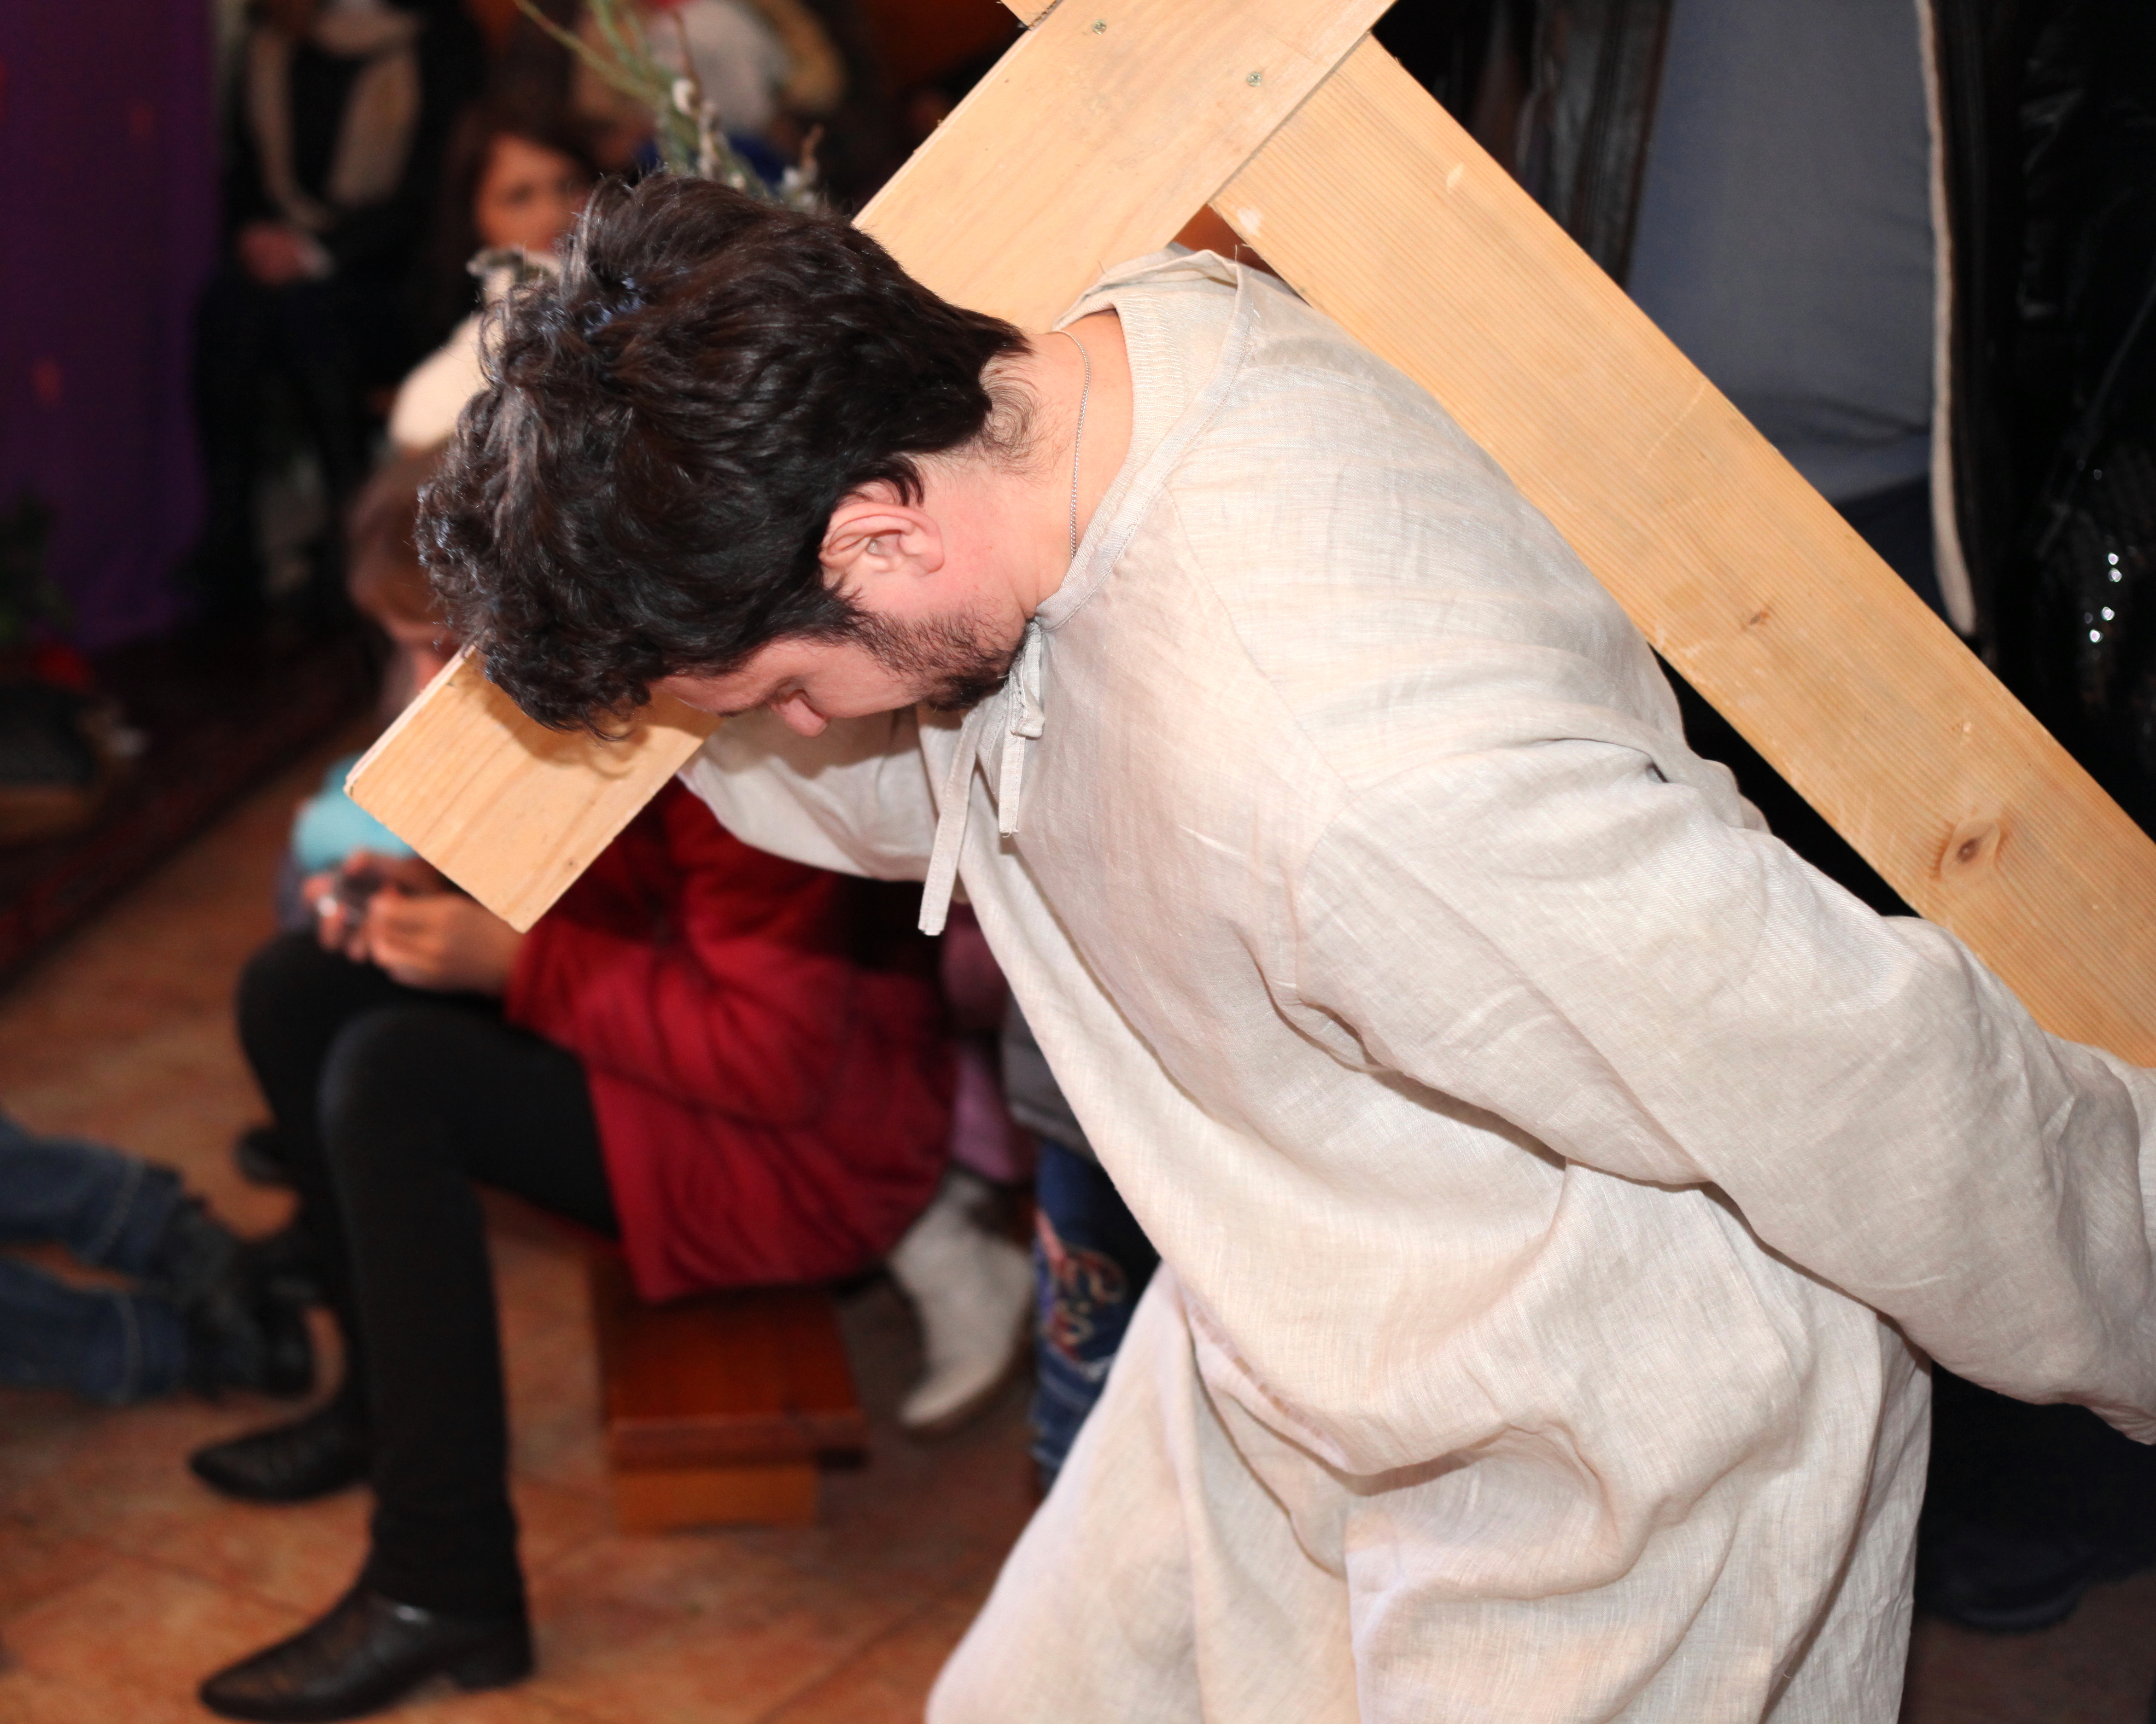 Jesus carrying cross in the Passion of the Christ performance, photo 2